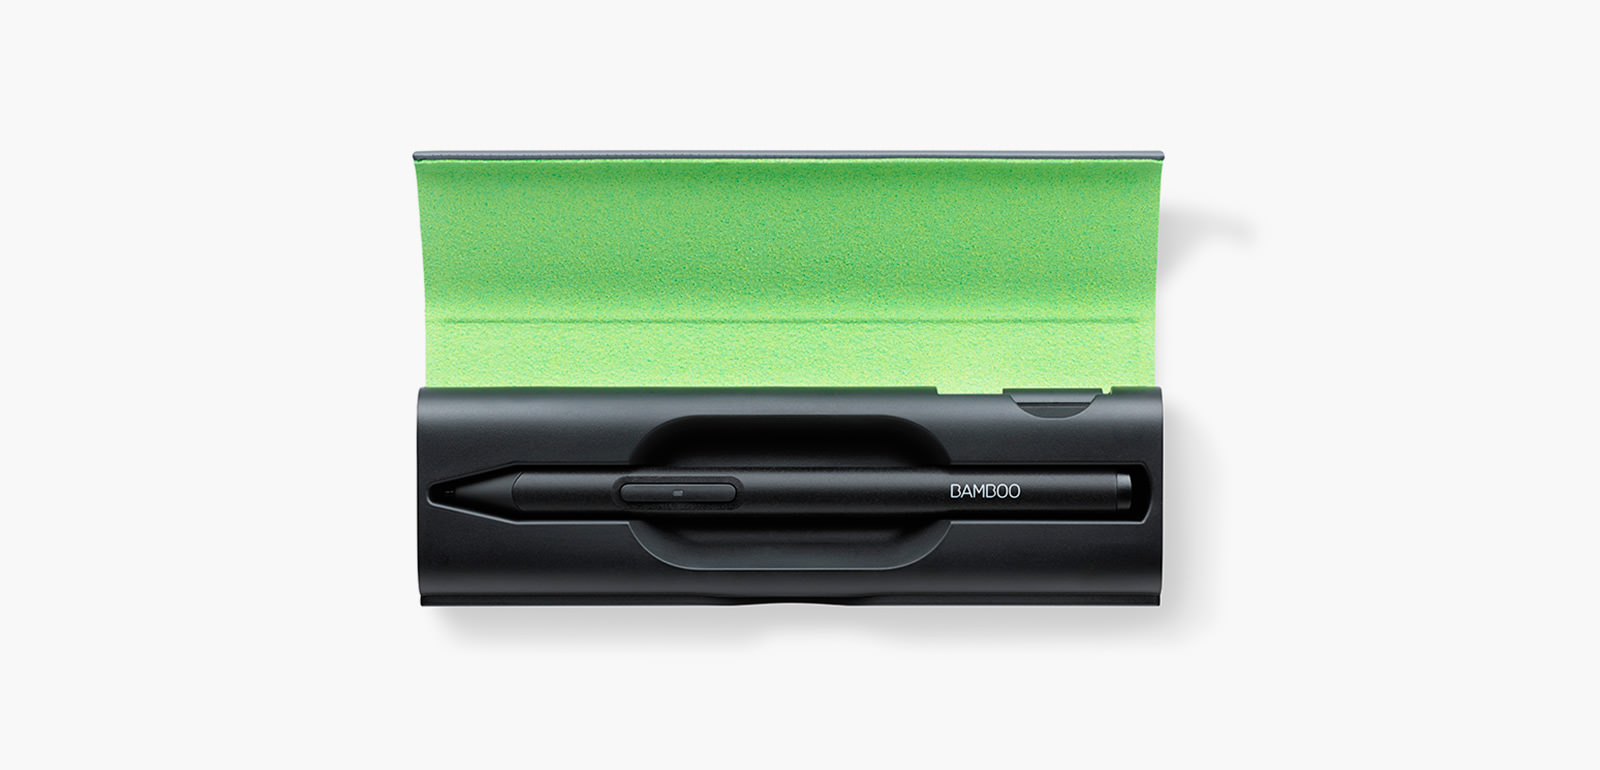 Wacom Bamboo Sketch Stylus for iPhone and iPad  Black for sale online   eBay